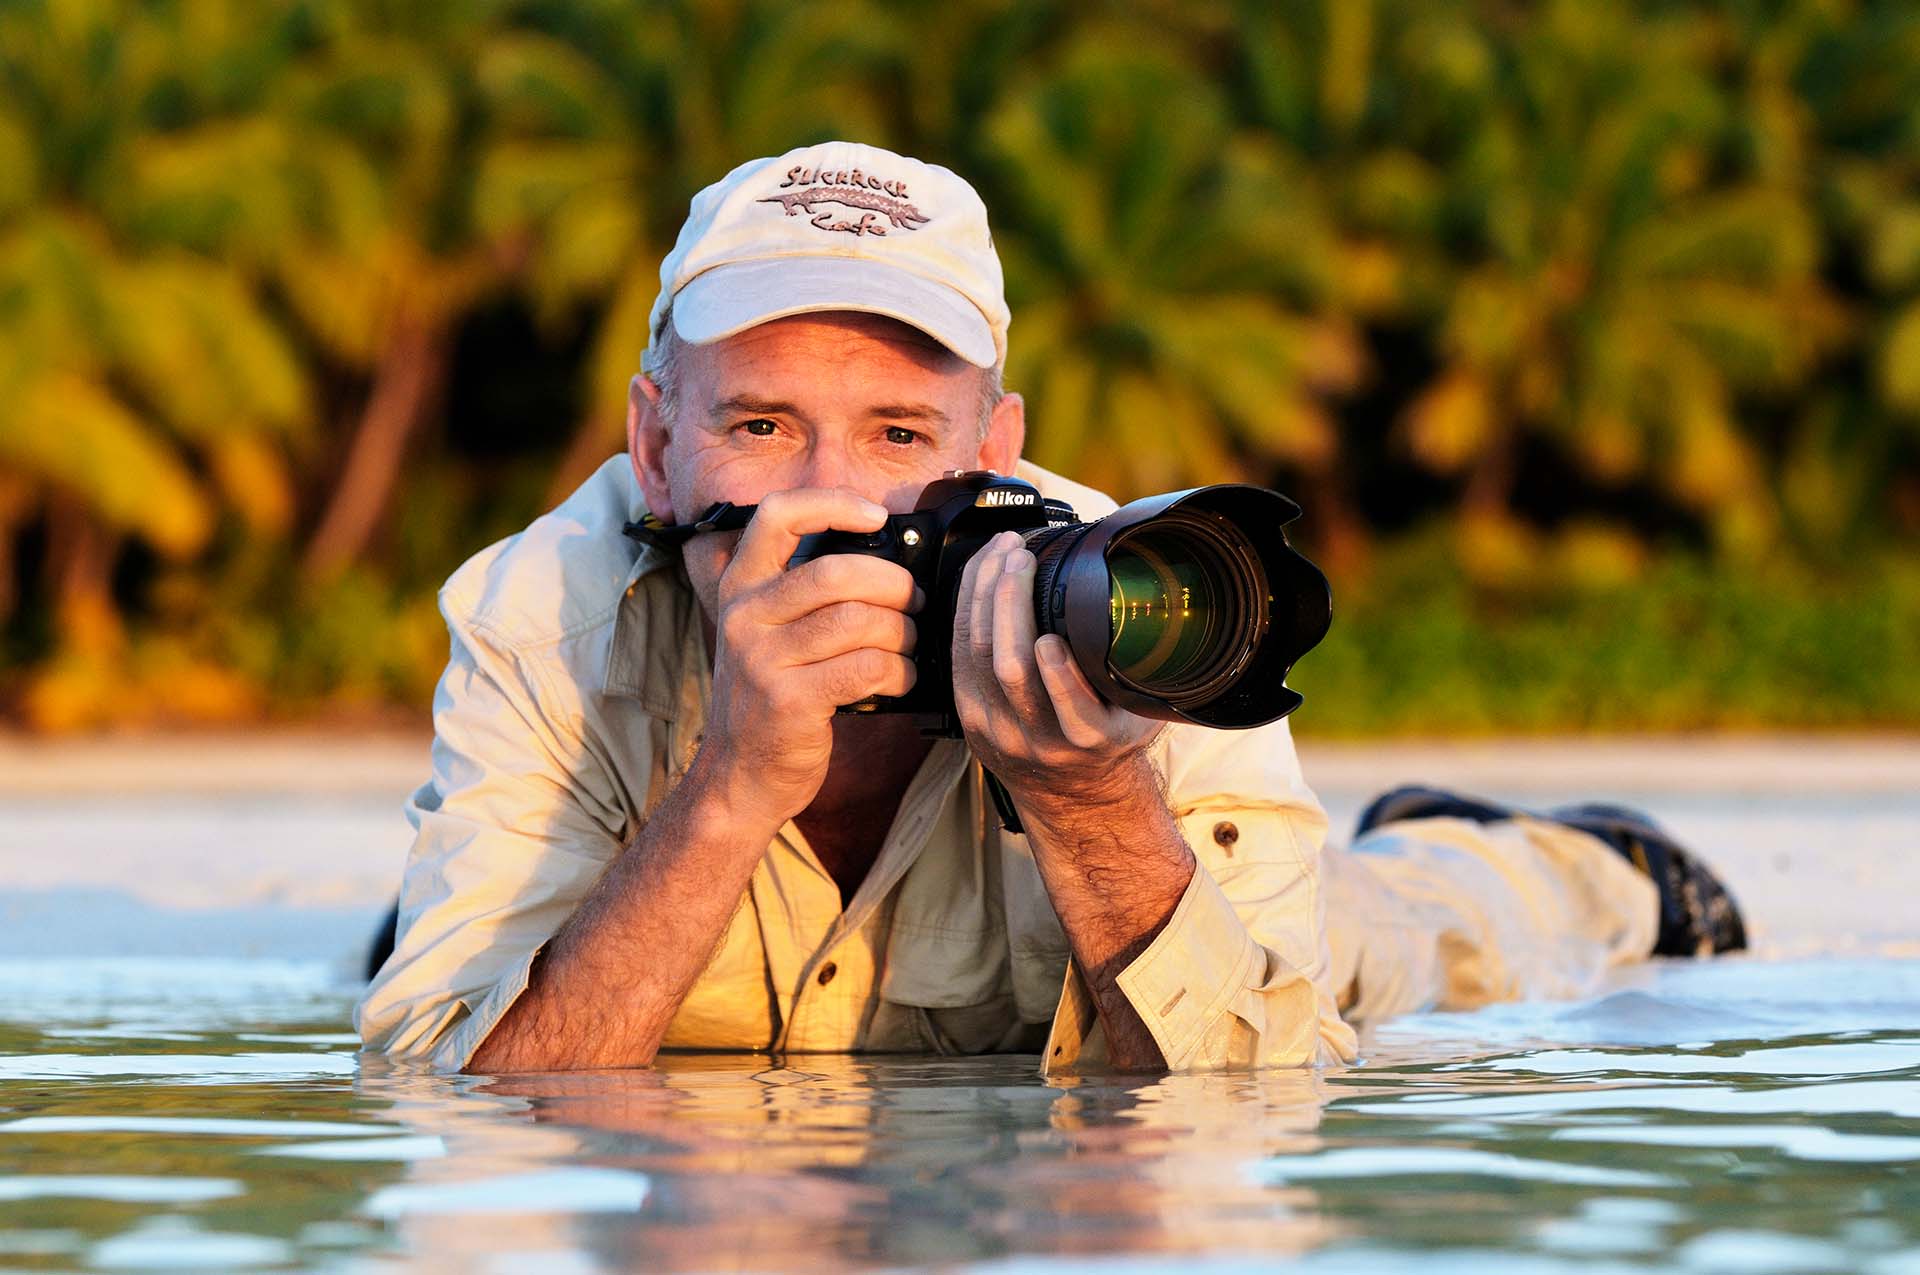 Martin at work on Seychelles Islands, in shallow water of the Saint Joseph atoll.